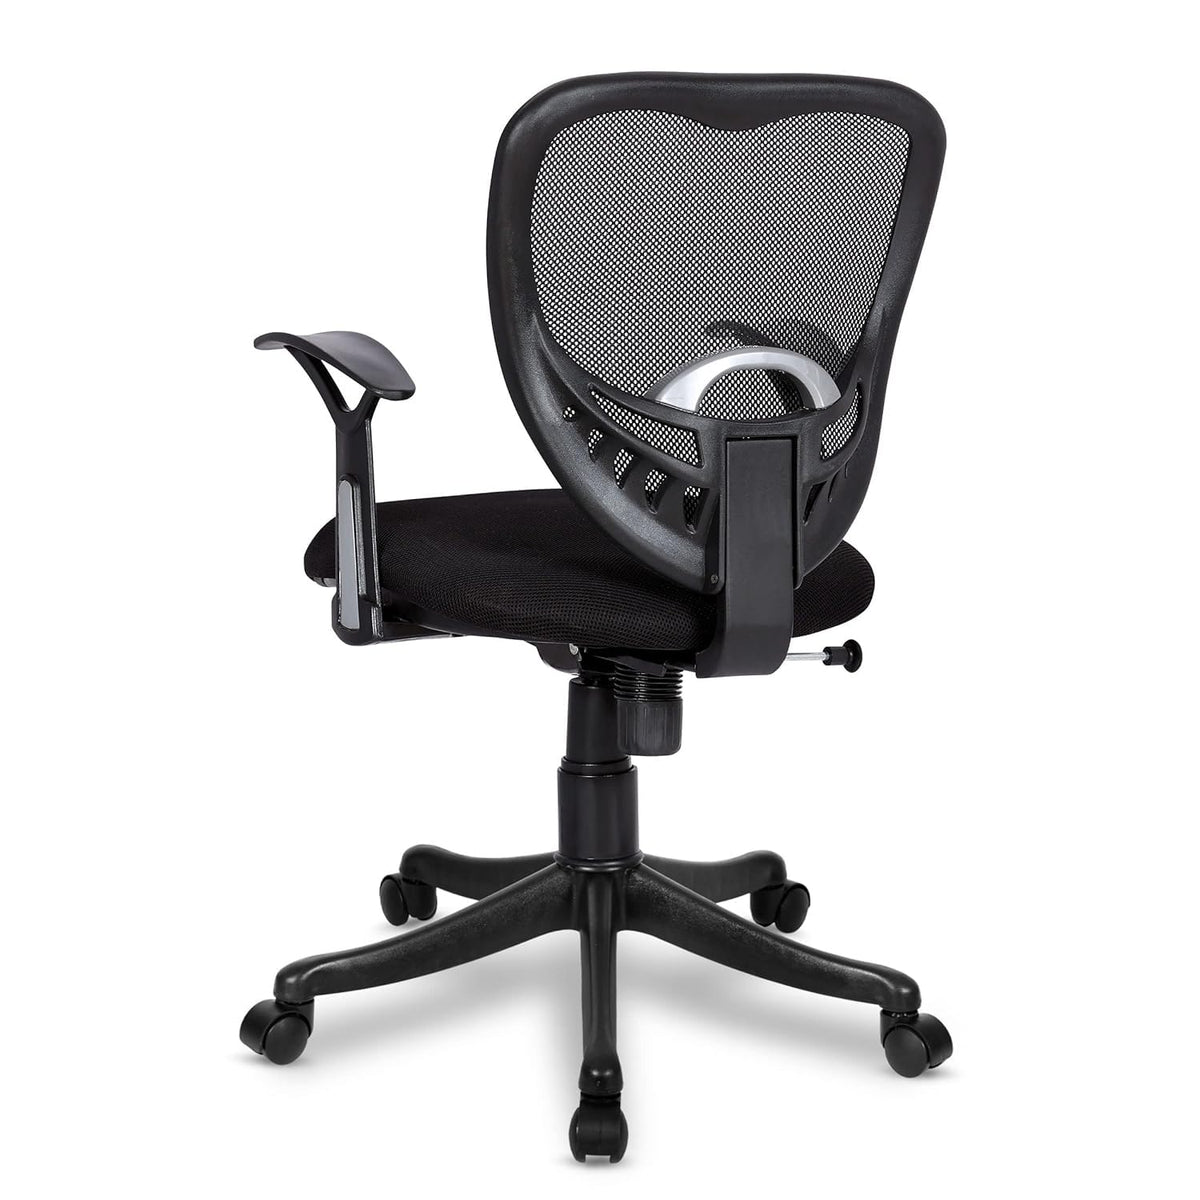 SmileSellers Star Execuative Ergonomic Office Chair| Height Adjustable Seat | Upholstered Seat and T Type armrest Provides Better Comfort |Push Back Tilt Feature |Mid Back